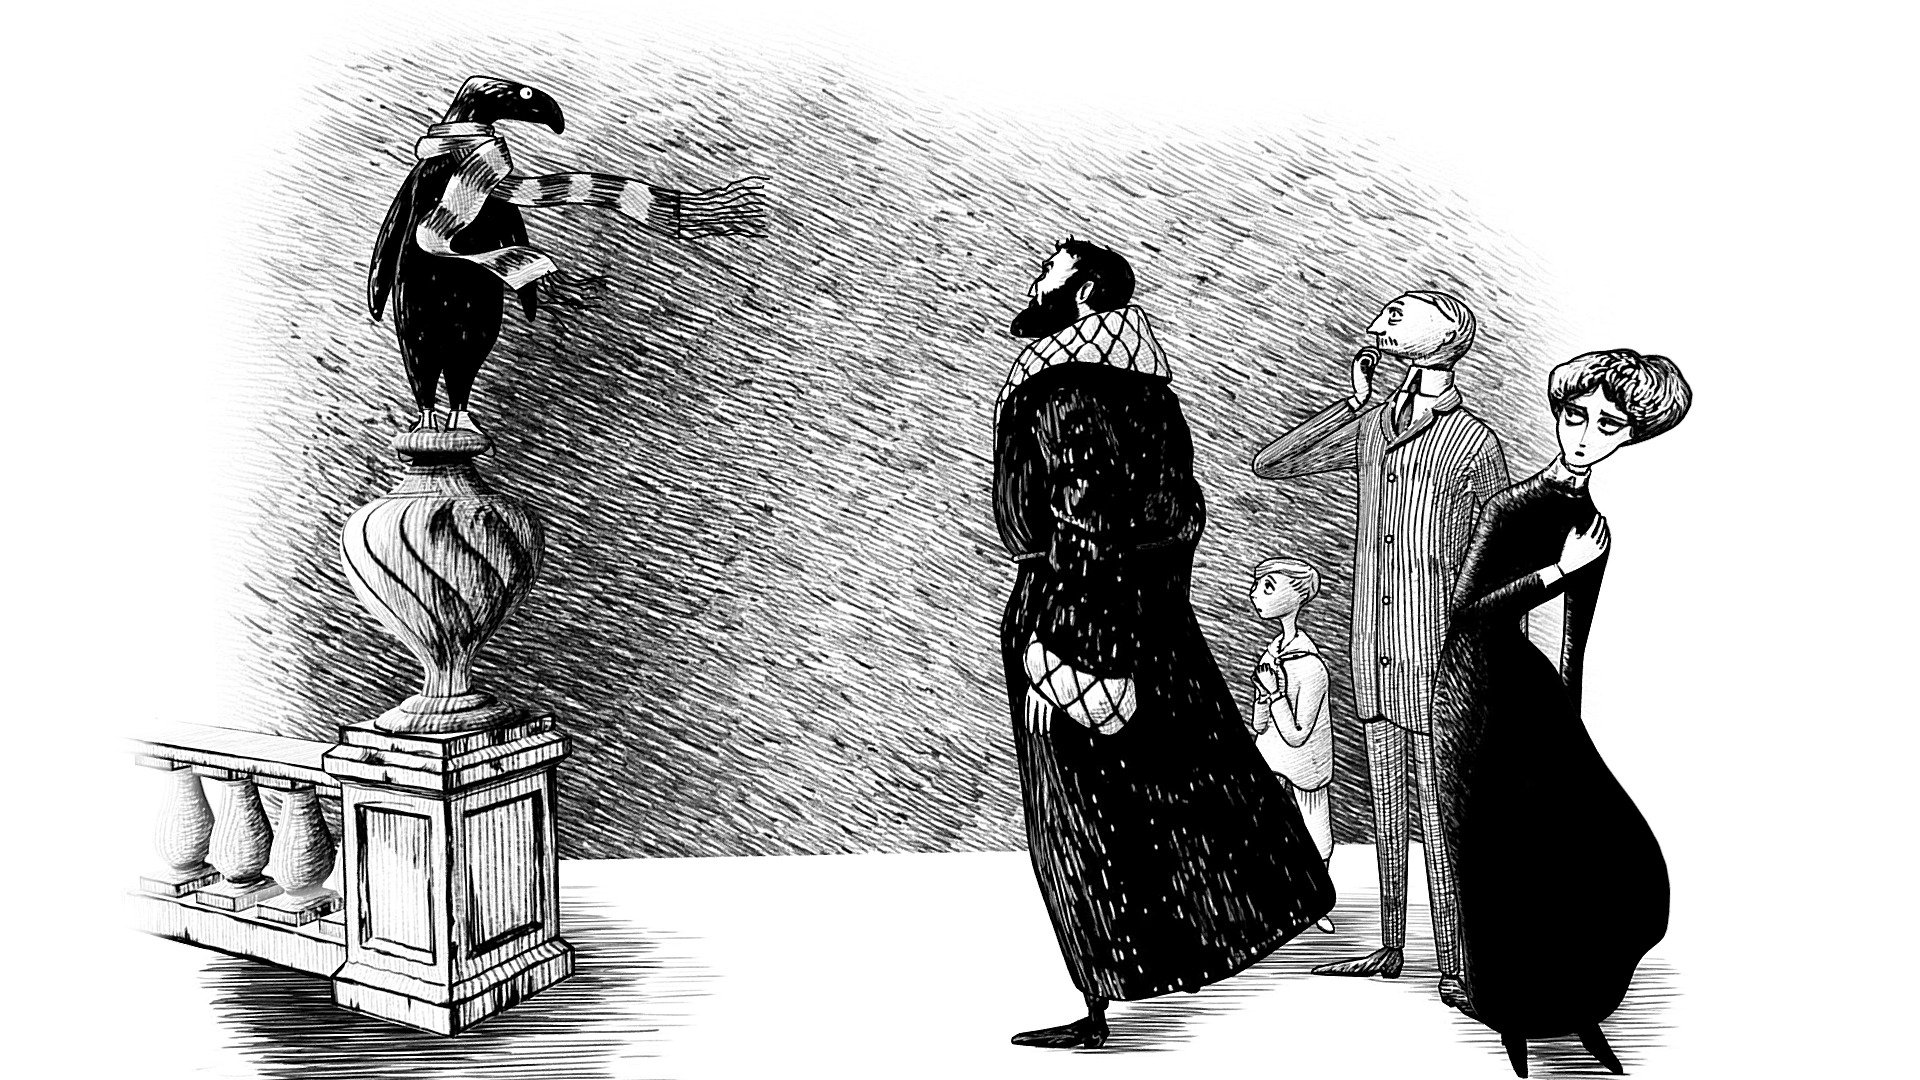 I love Edward Gorey's dark and humorous stories. In particular, &ldquo;The Doubtful Guest